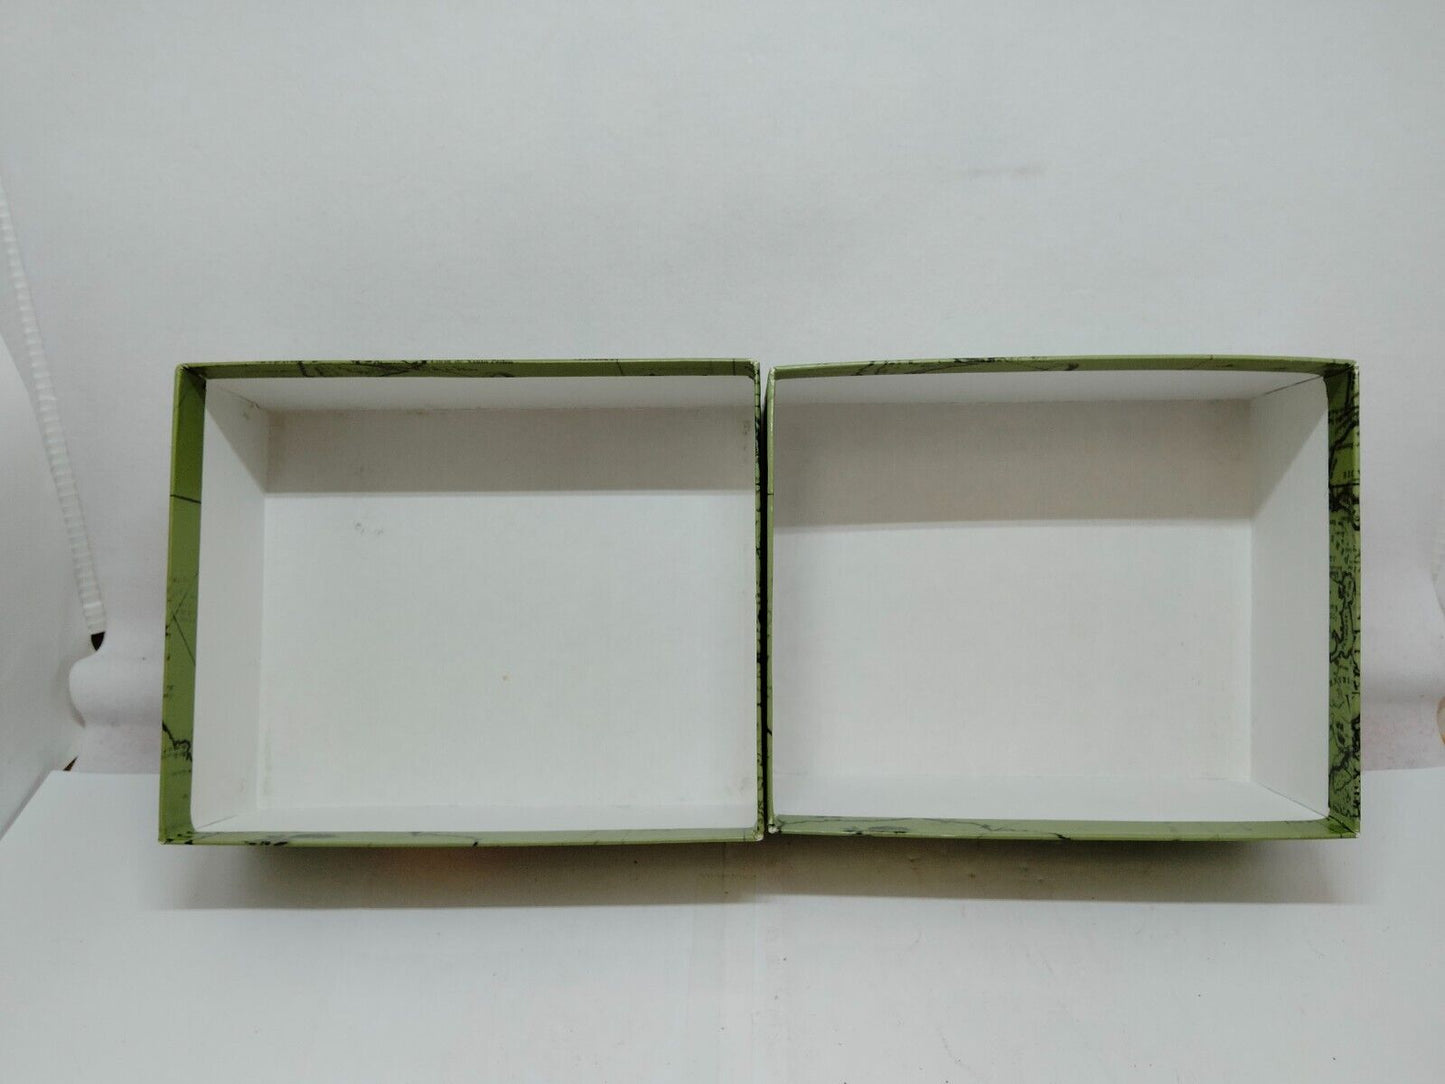 GENUINE ROLEX 67480 Oyster Perpetual watch box case 11.00.01 green 1010001y1S